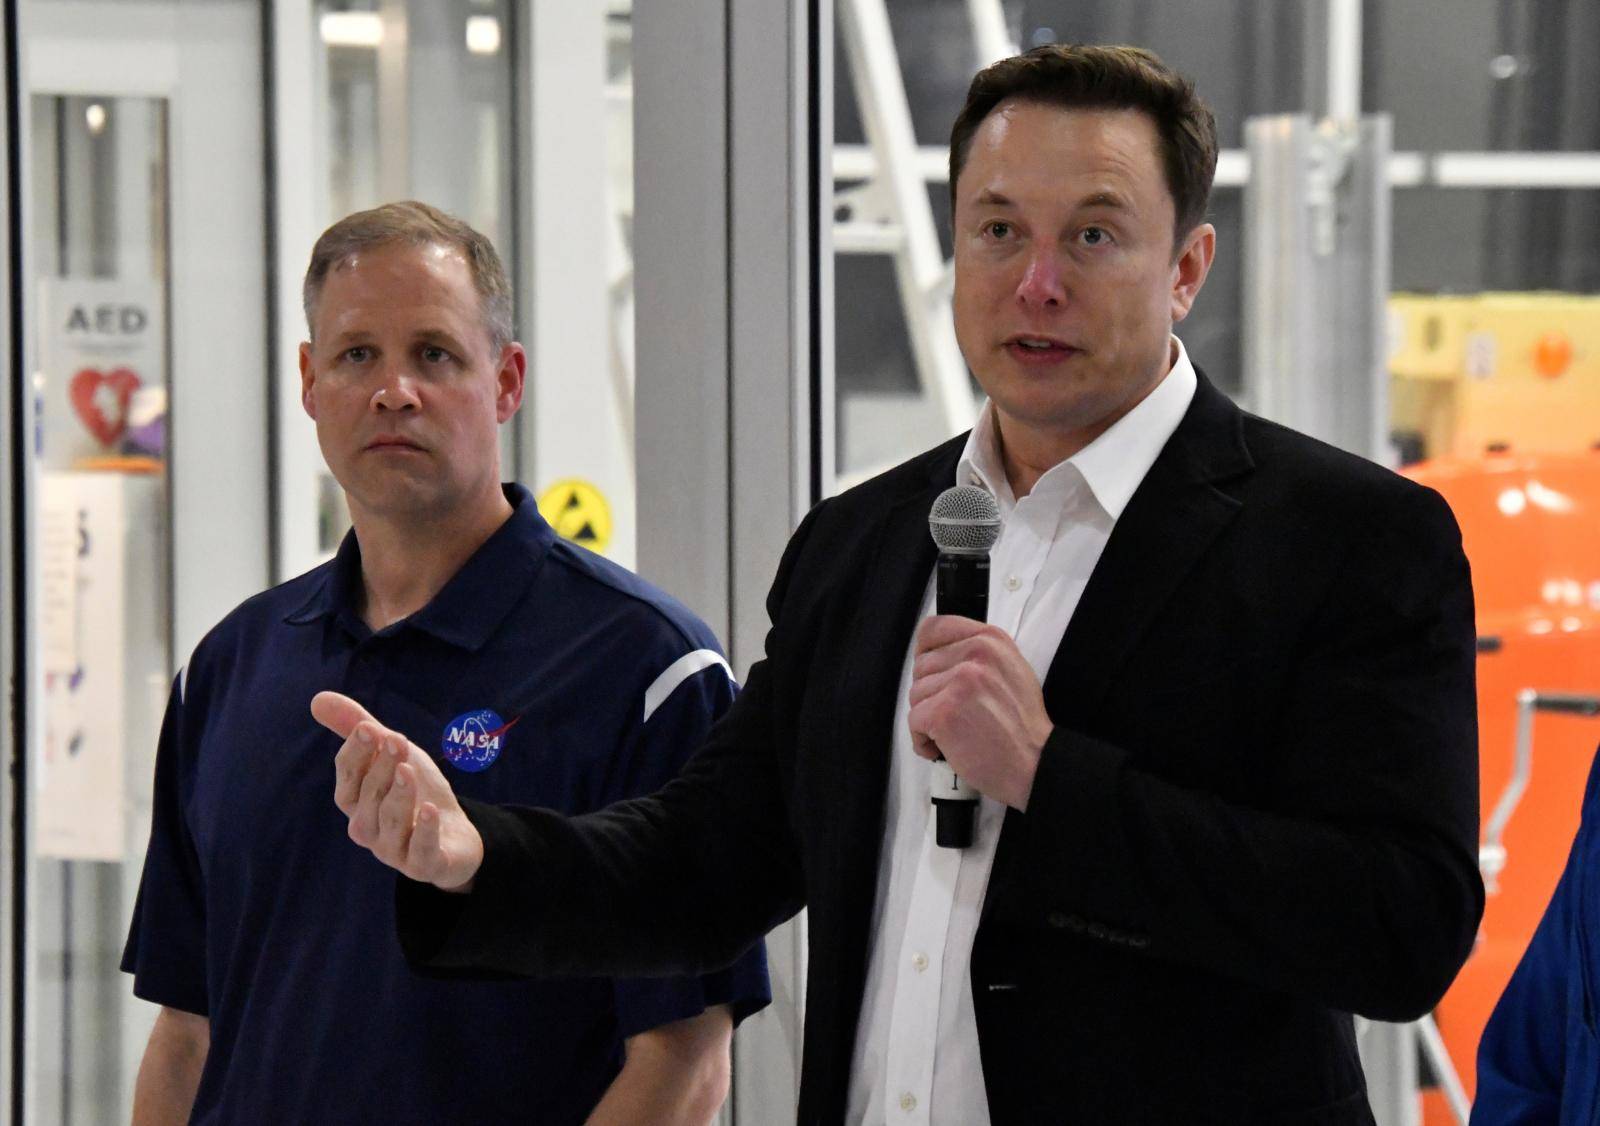 NASA Administrator Jim Bridenstine and SpaceX Chief Engineer Elon Musk talk to the press after a tour of  SpaceX headquarters in Hawthorne